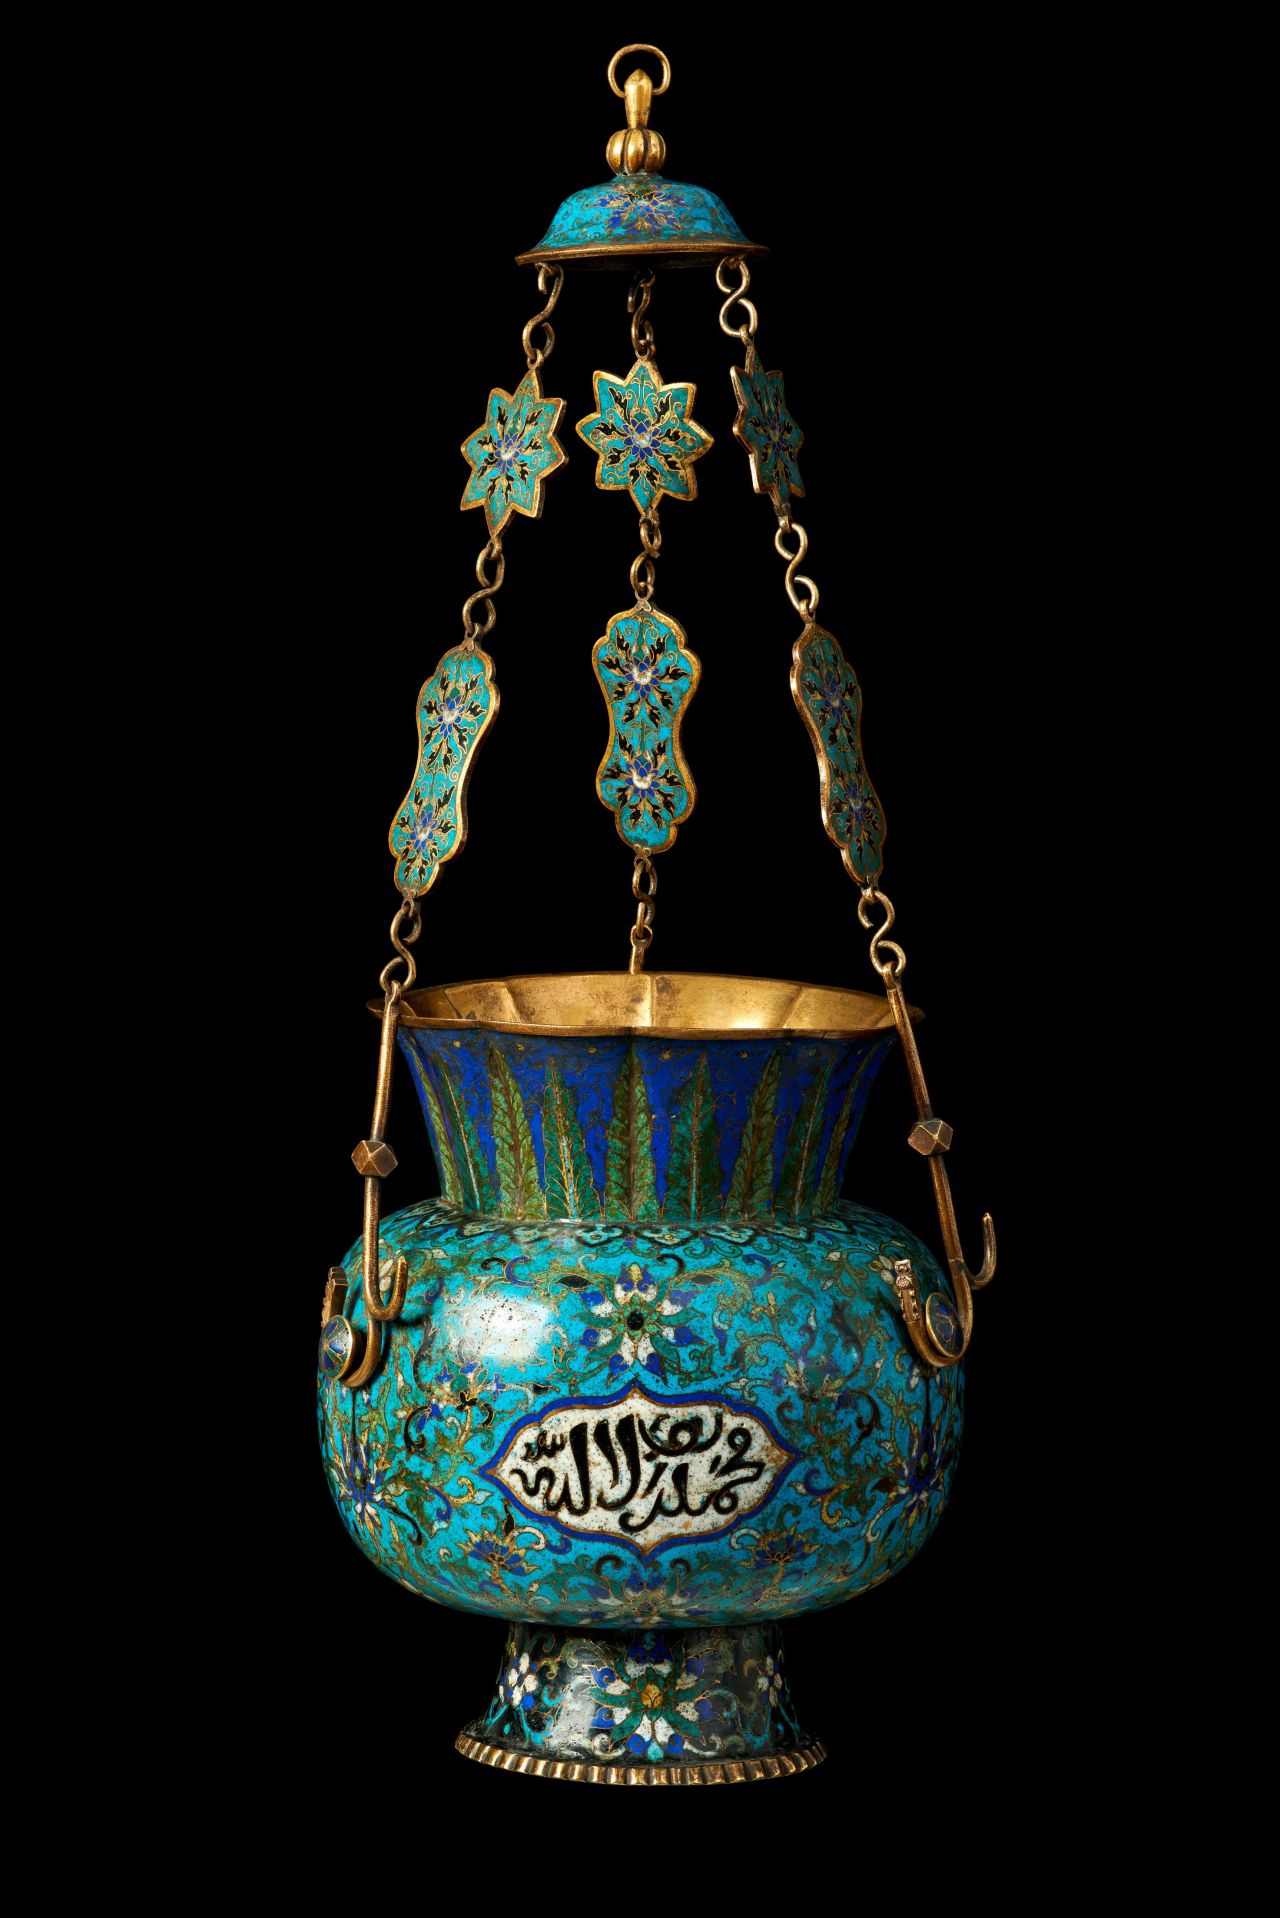 Dating back to the 19th century, this hanging lamp combines the Middle East's artistic traditions with those of China, where it was produced.